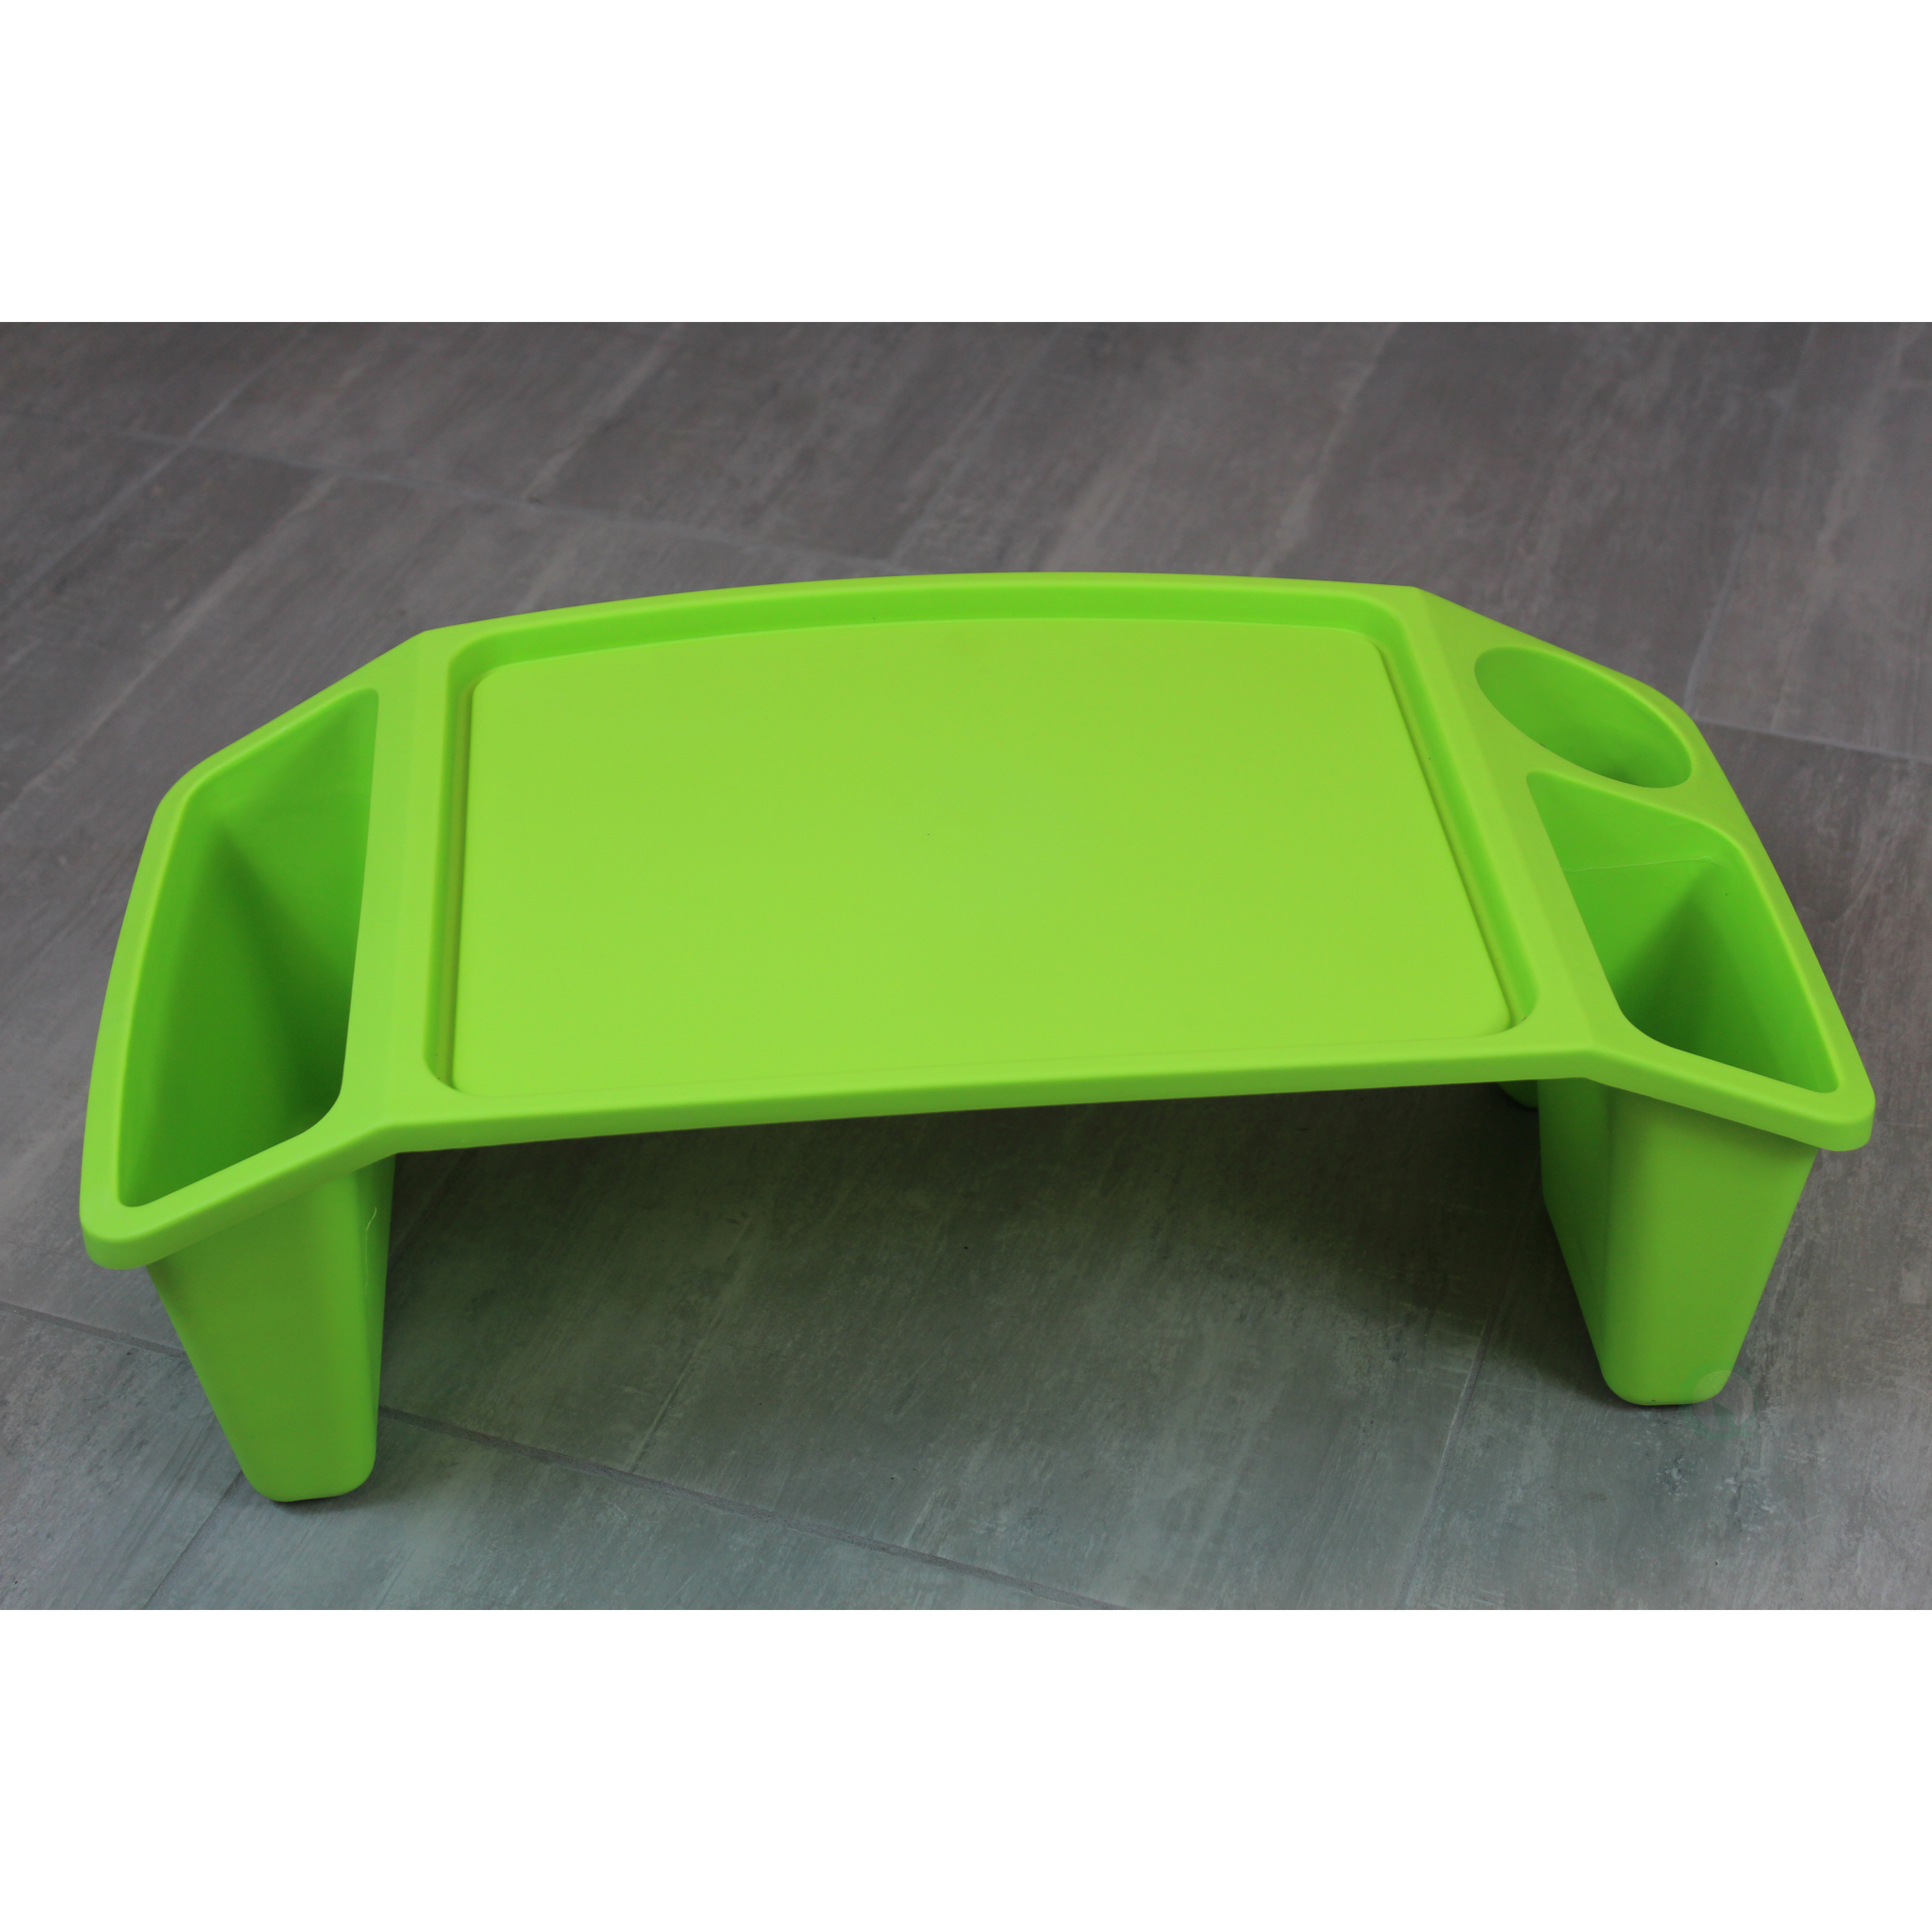 Kids Lap Desk Tray Portable Activity Table - Set Of 12 Green